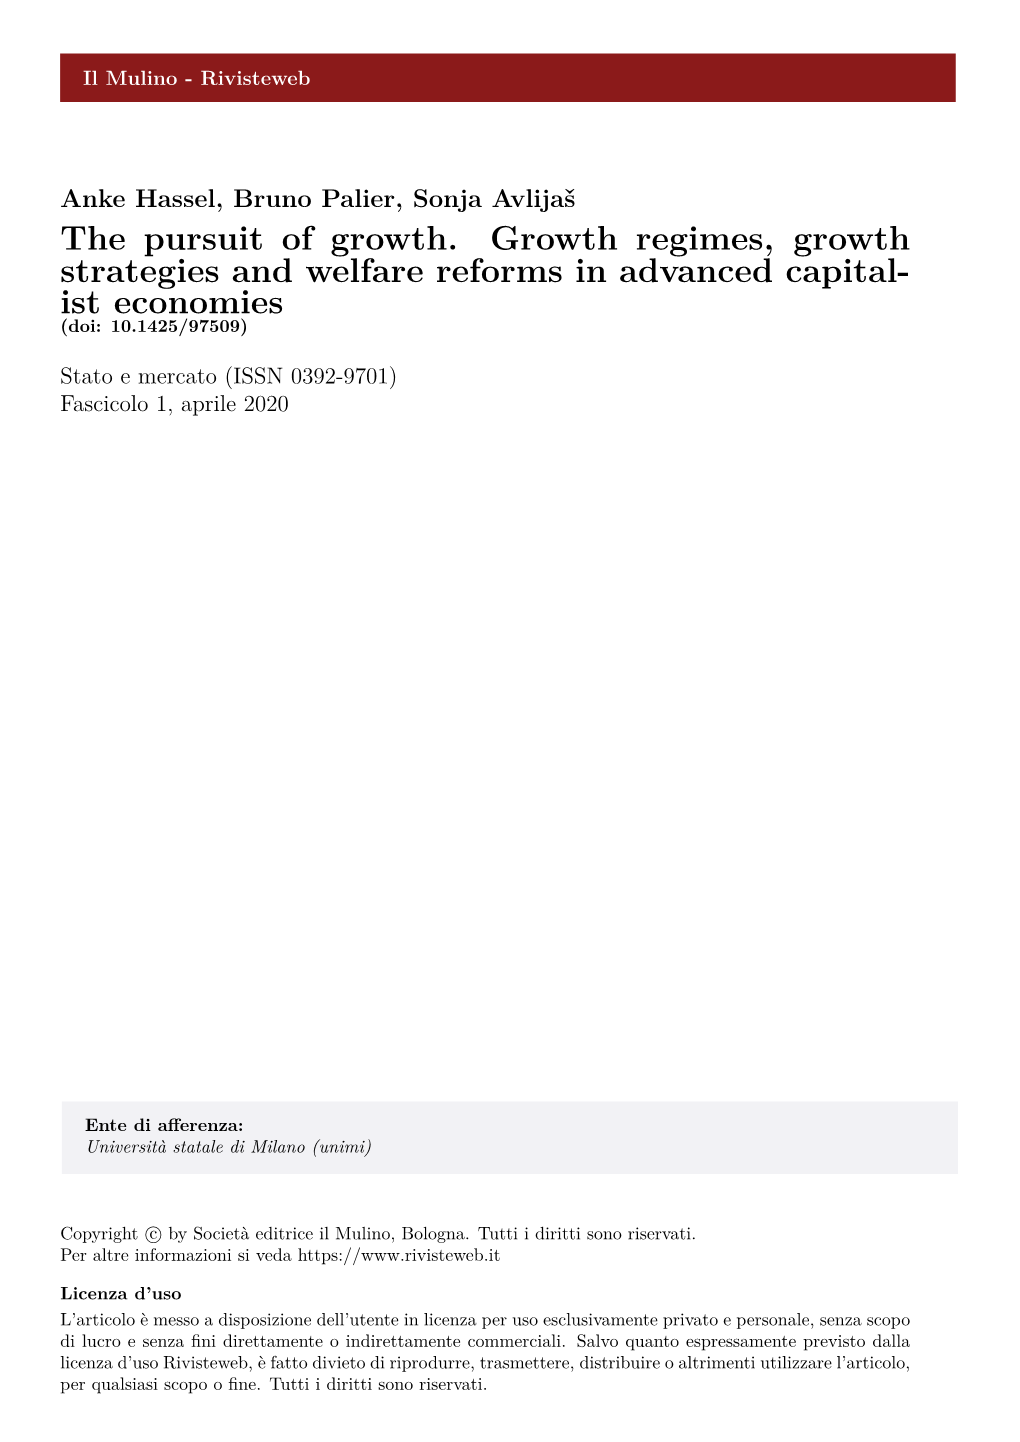 The Pursuit of Growth. Growth Regimes, Growth Strategies and Welfare Reforms in Advanced Capital- Ist Economies (Doi: 10.1425/97509)